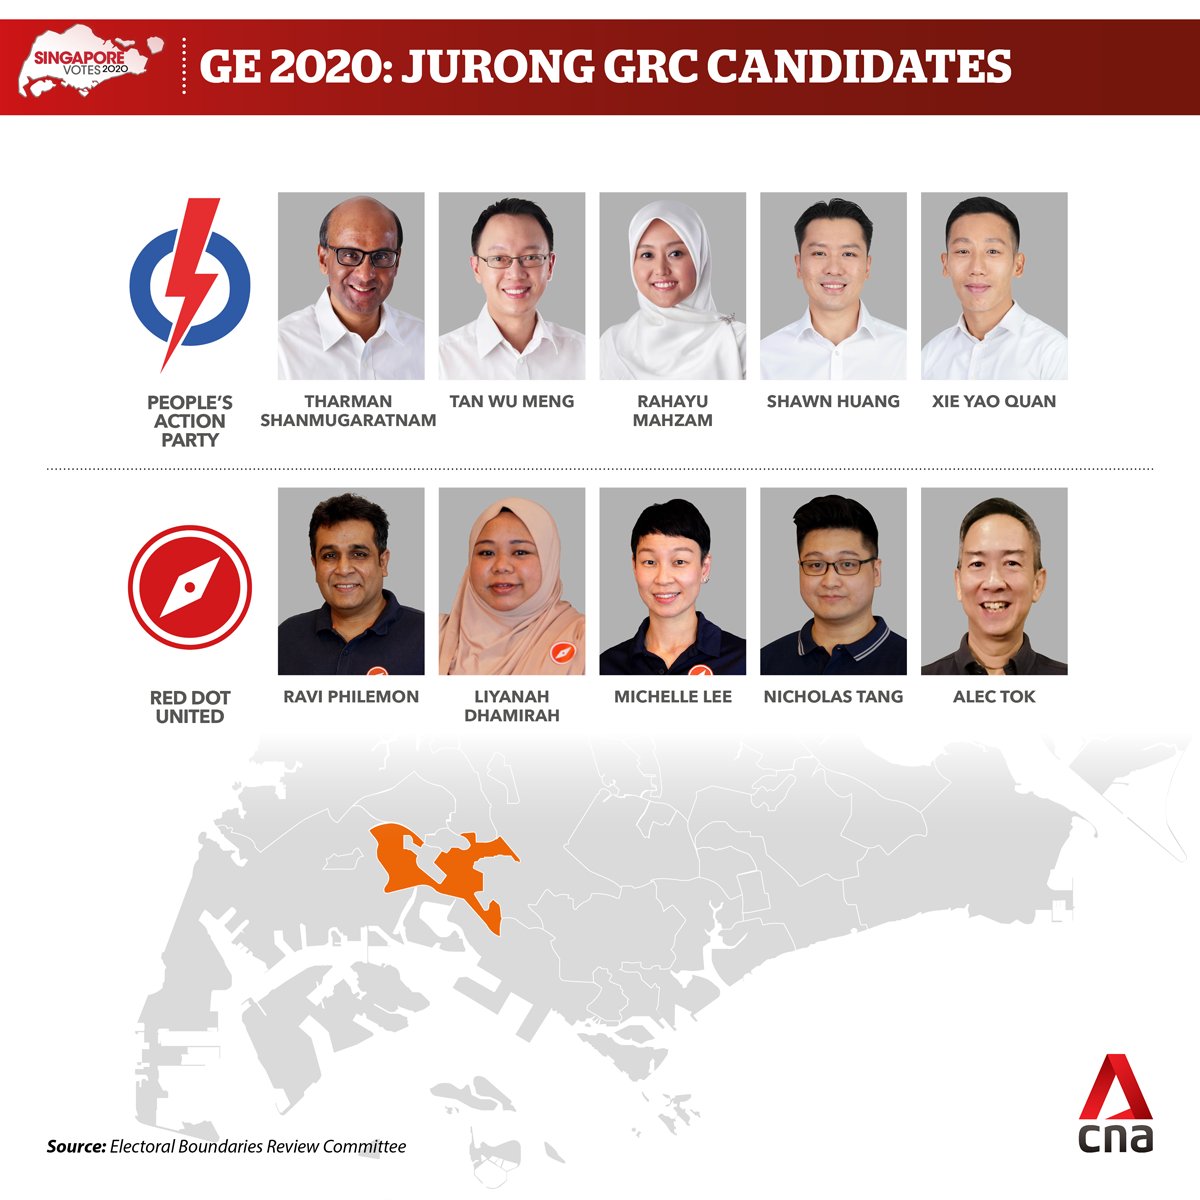  #GE2020  : The Red Dot United team going up against the PAP team led by SM Tharman Shanmugaratnam in Jurong GRC  https://cna.asia/38hMaBN 